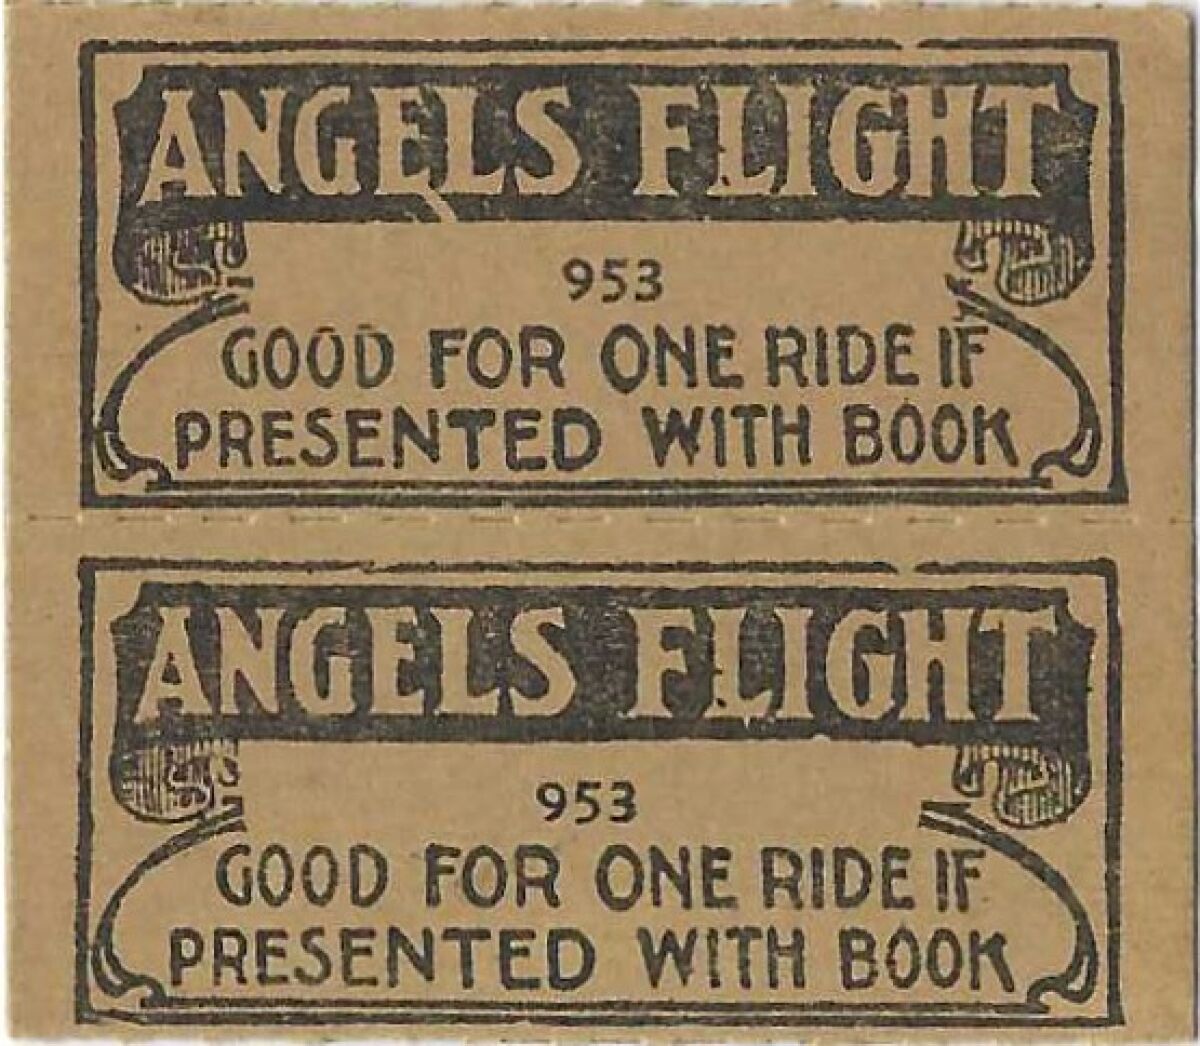 Vintage tickets for Angels Flight: "Good for one ride if presented with book."